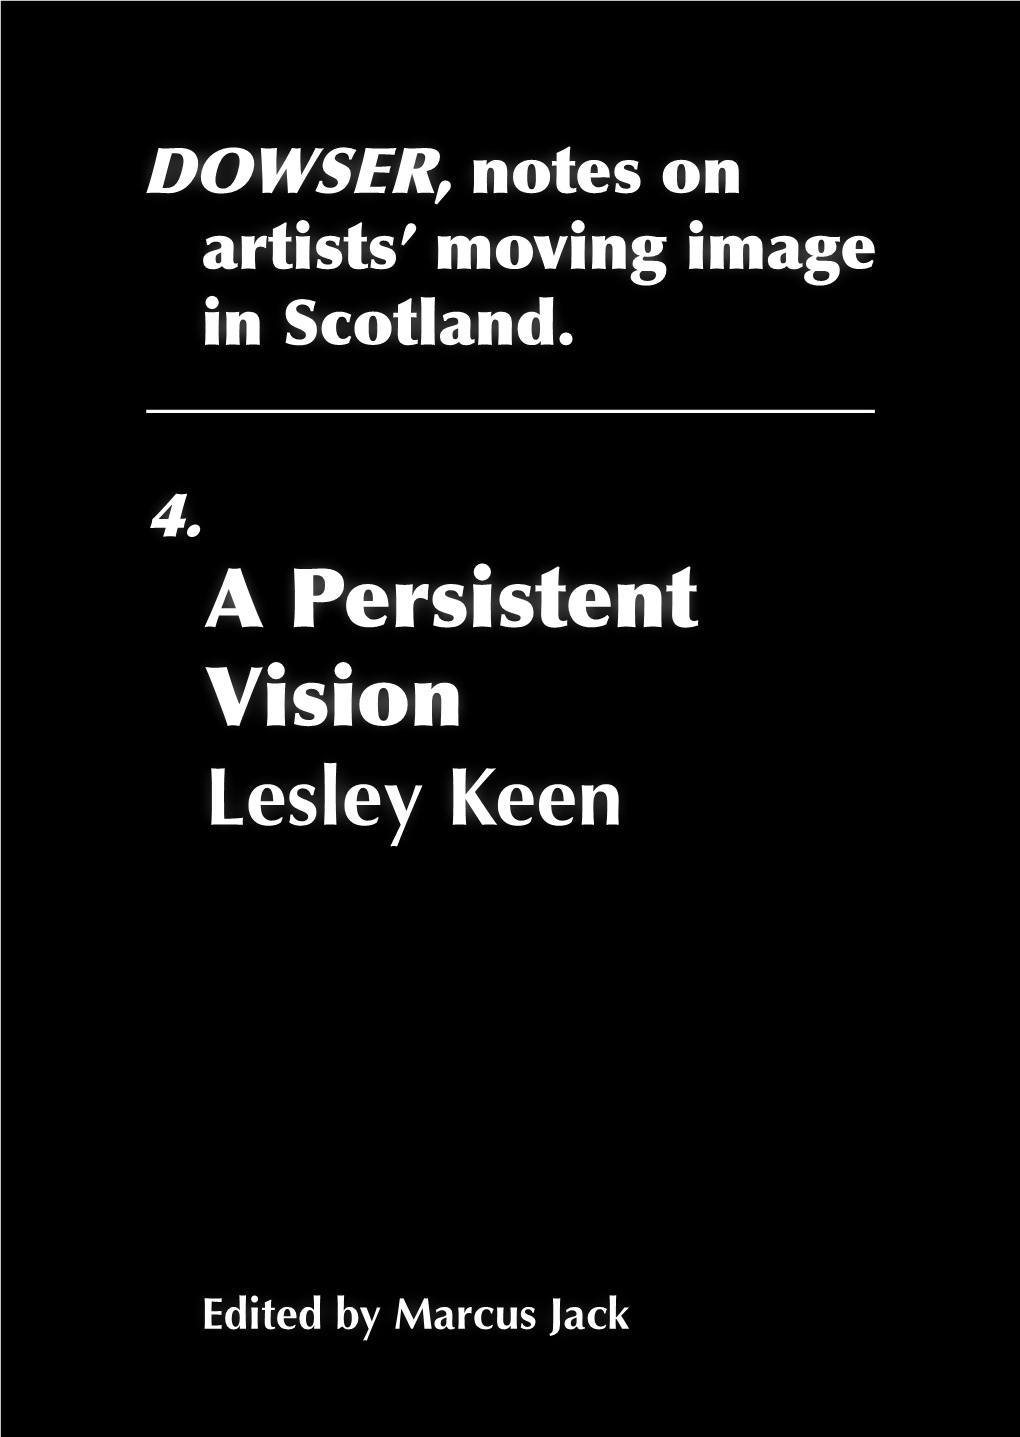 A Persistent Vision Lesley Keen DOWSER Issue 4 (Spring 2021) Edit, Typeset, Design: Marcus Jack